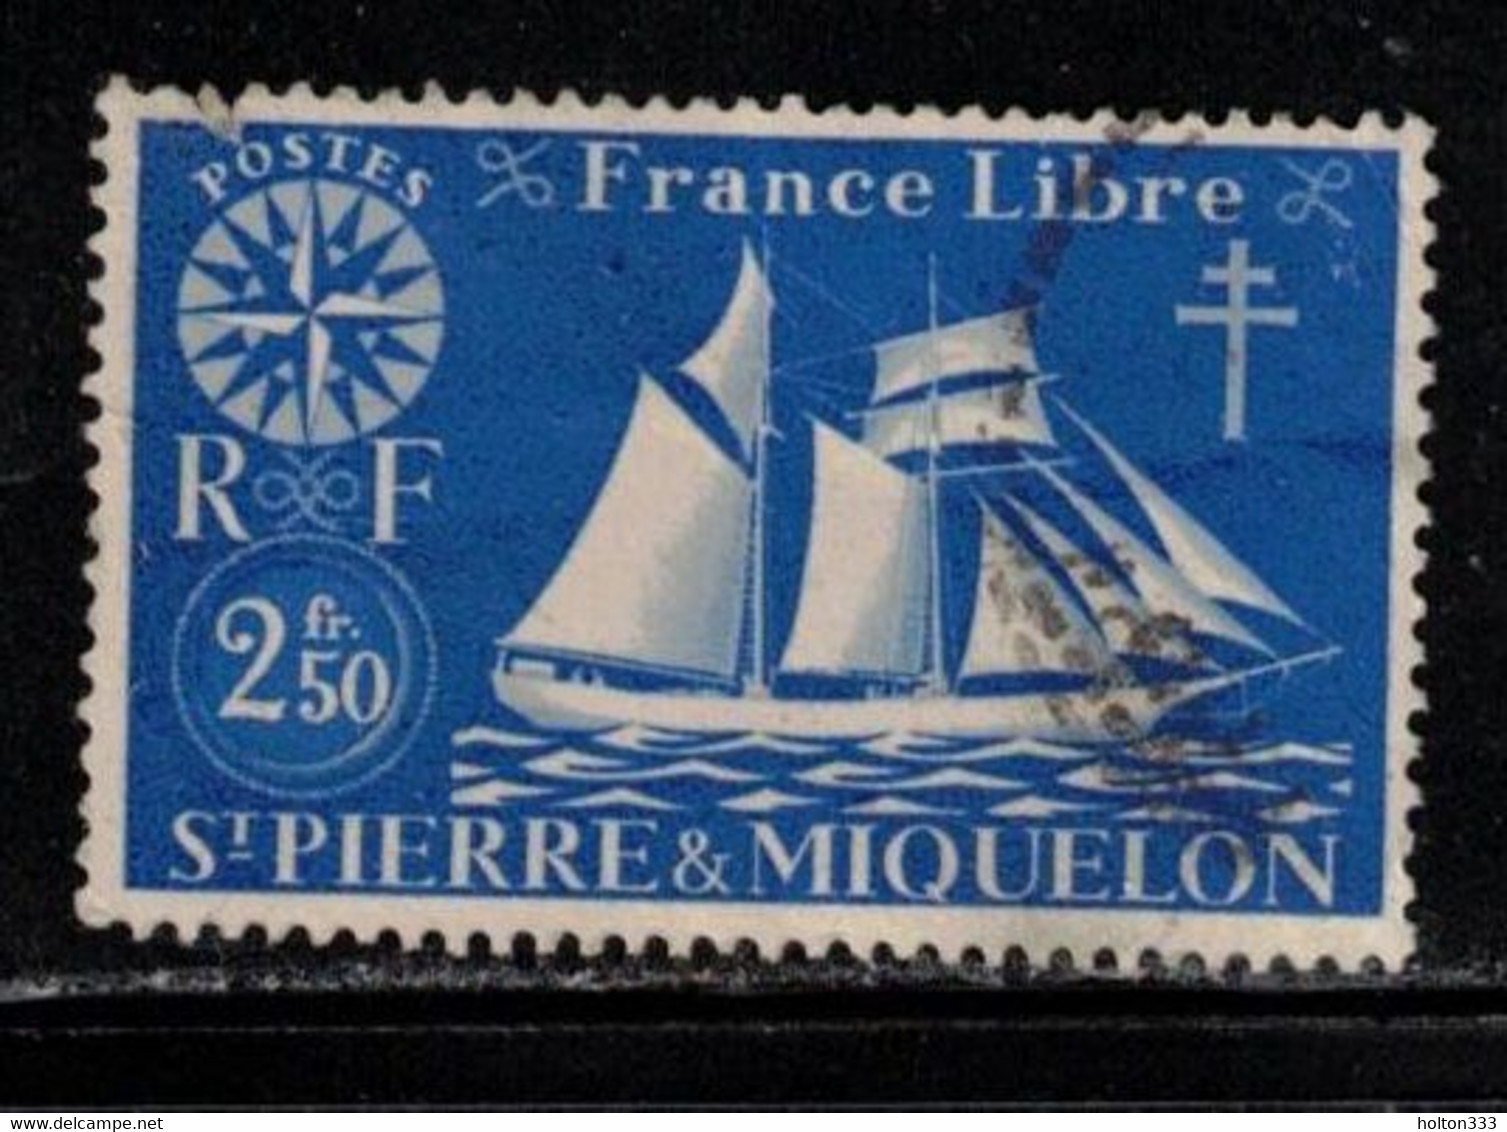 ST PIERRE & MIQUELON Scott # 309 Used - St Malo Fishing Schooner - Used Stamps